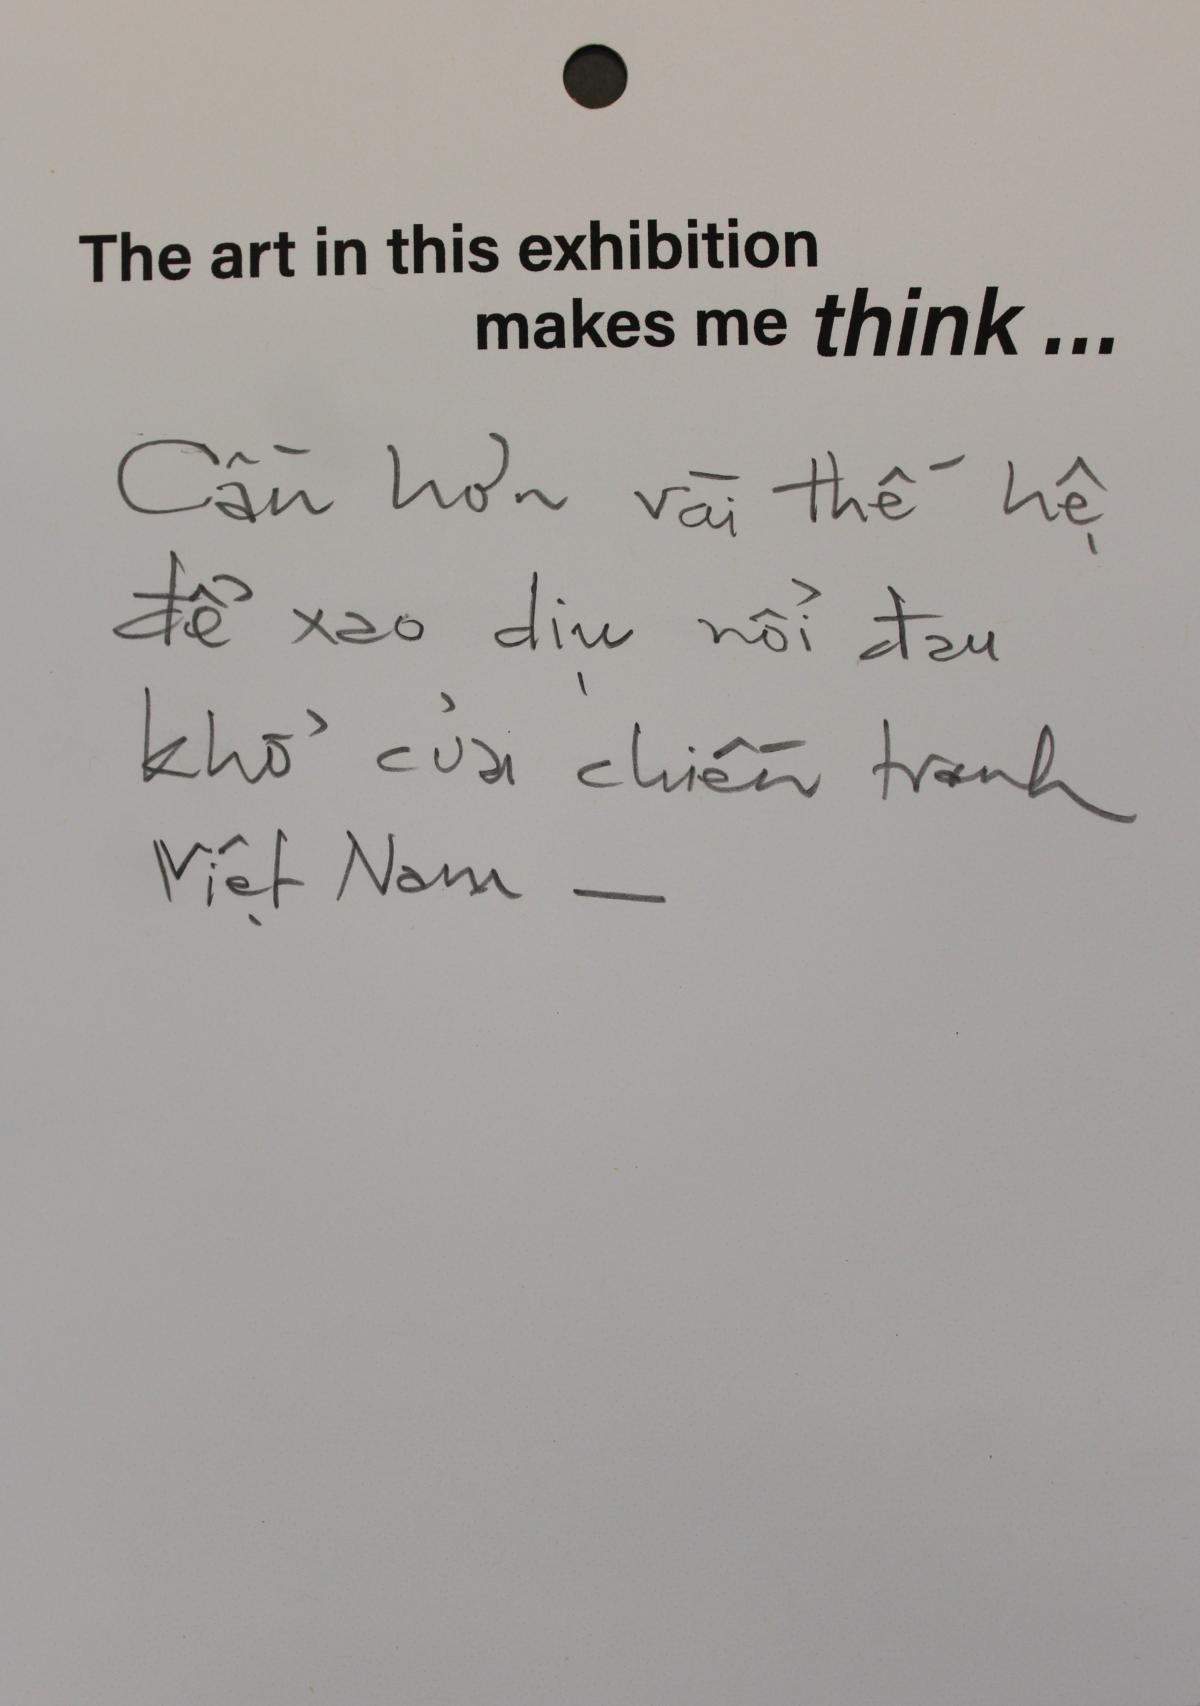 A visitor respond to the exhibition by writing in Vietnamese about the pain of the war